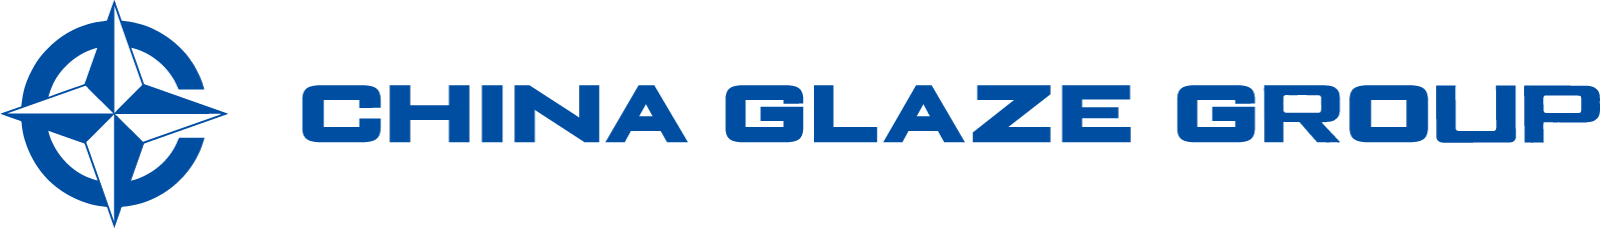 CG Japan manufactures and sells glass powder, ceramic glaze, glass frit, special glass powder, PiG, etc., and is a glass powder manufacturer in Taiwan that supplies products to Japan.